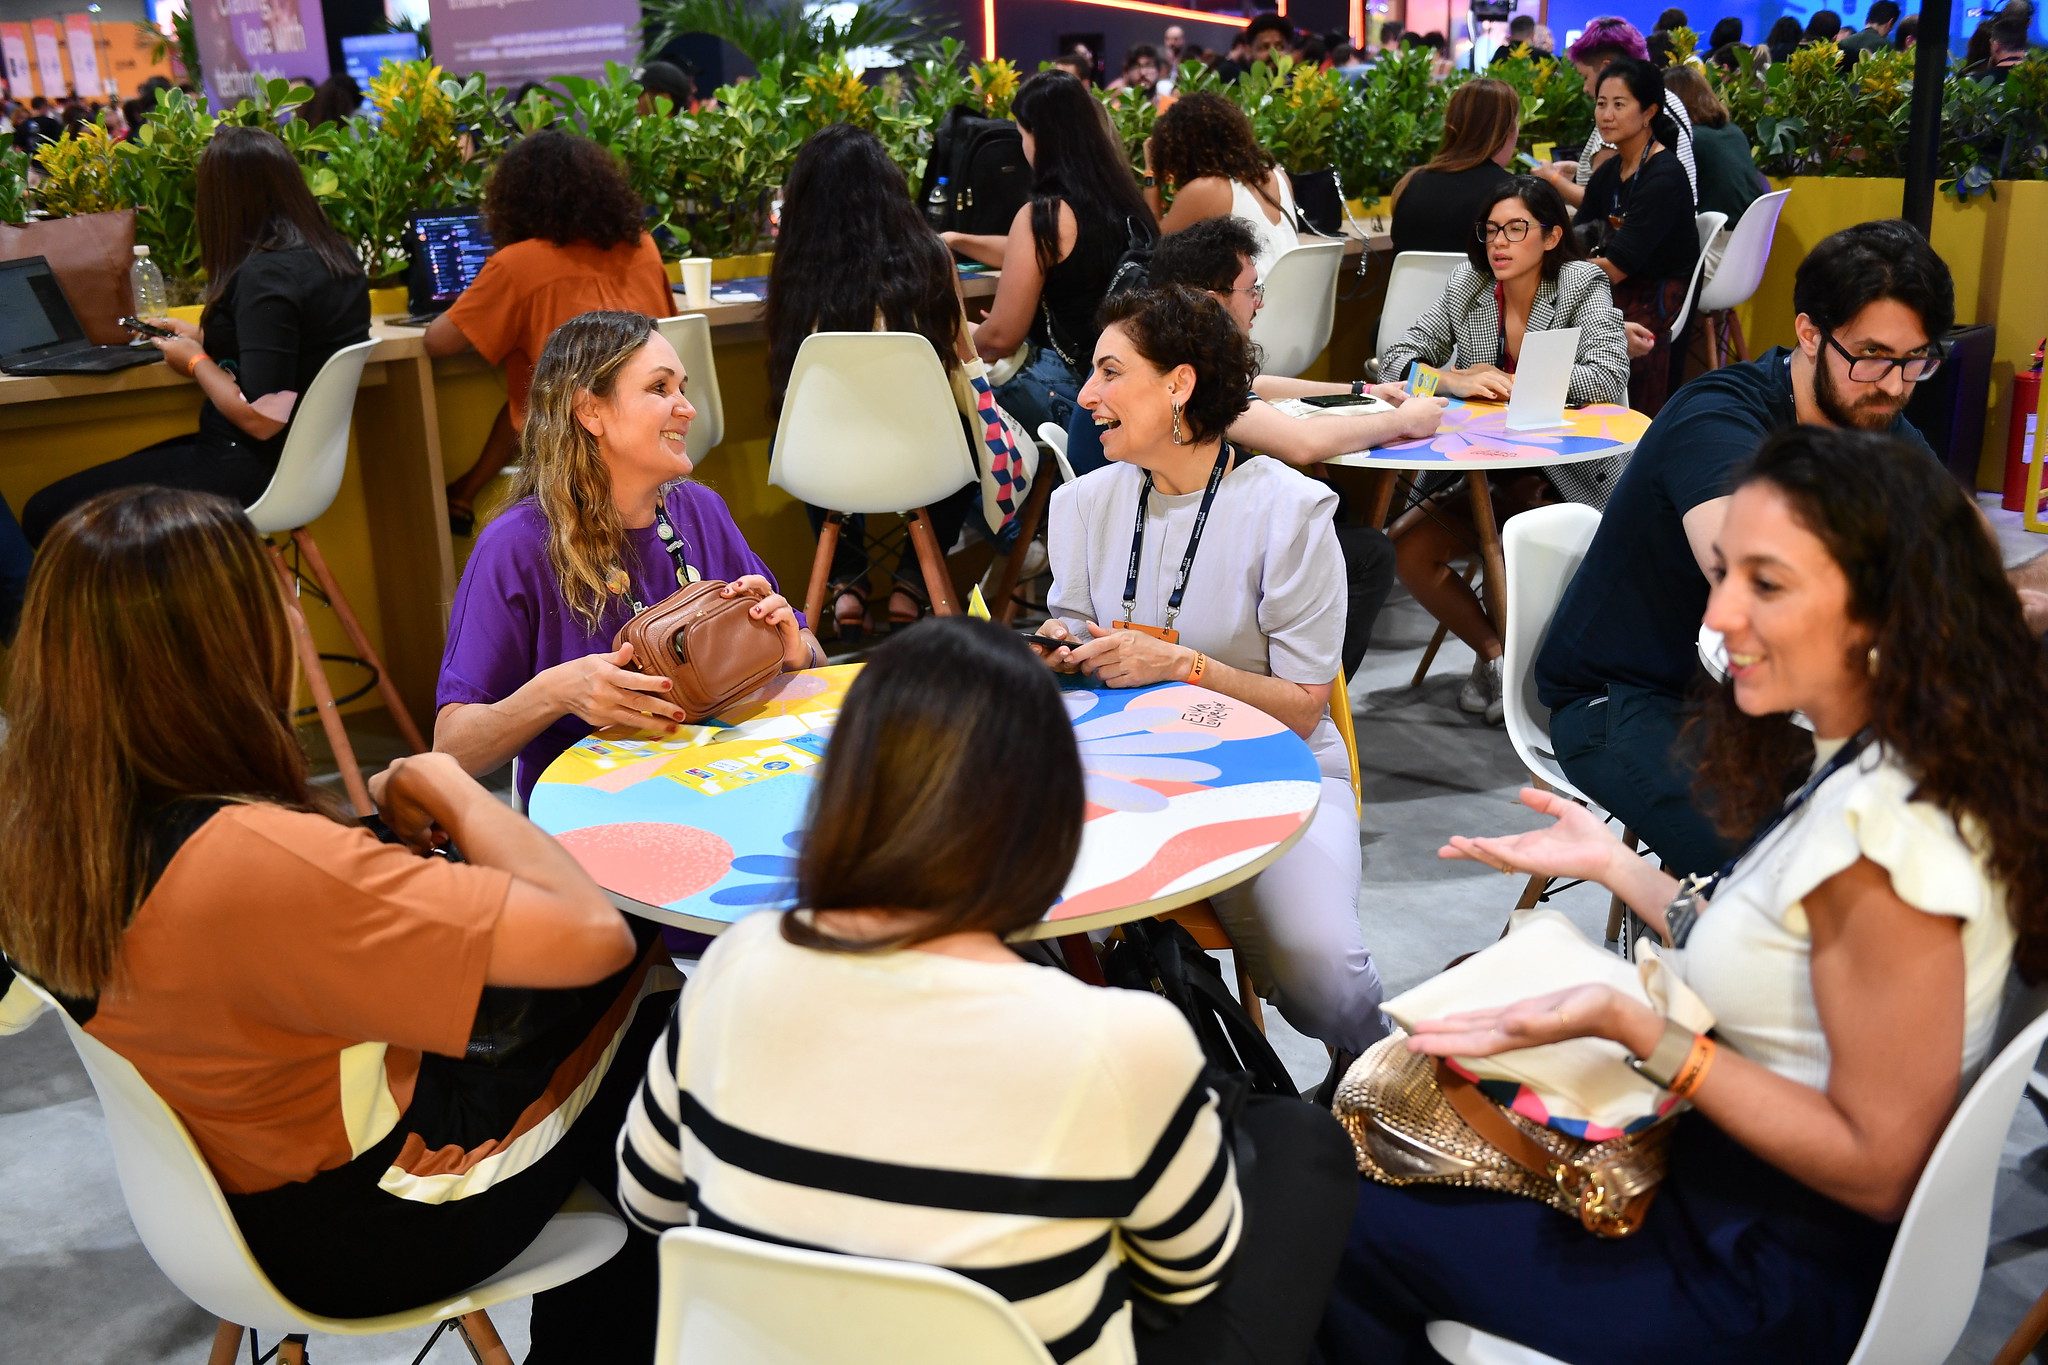 A group of smiling and laughing people sit around a round table. They appear to be engaged in several conversations. In the space around them are people sitting at other tables, and a row of people sitting on high stools at a counter. This is the Women in Tech Lounge at Web Summit Rio 2023.